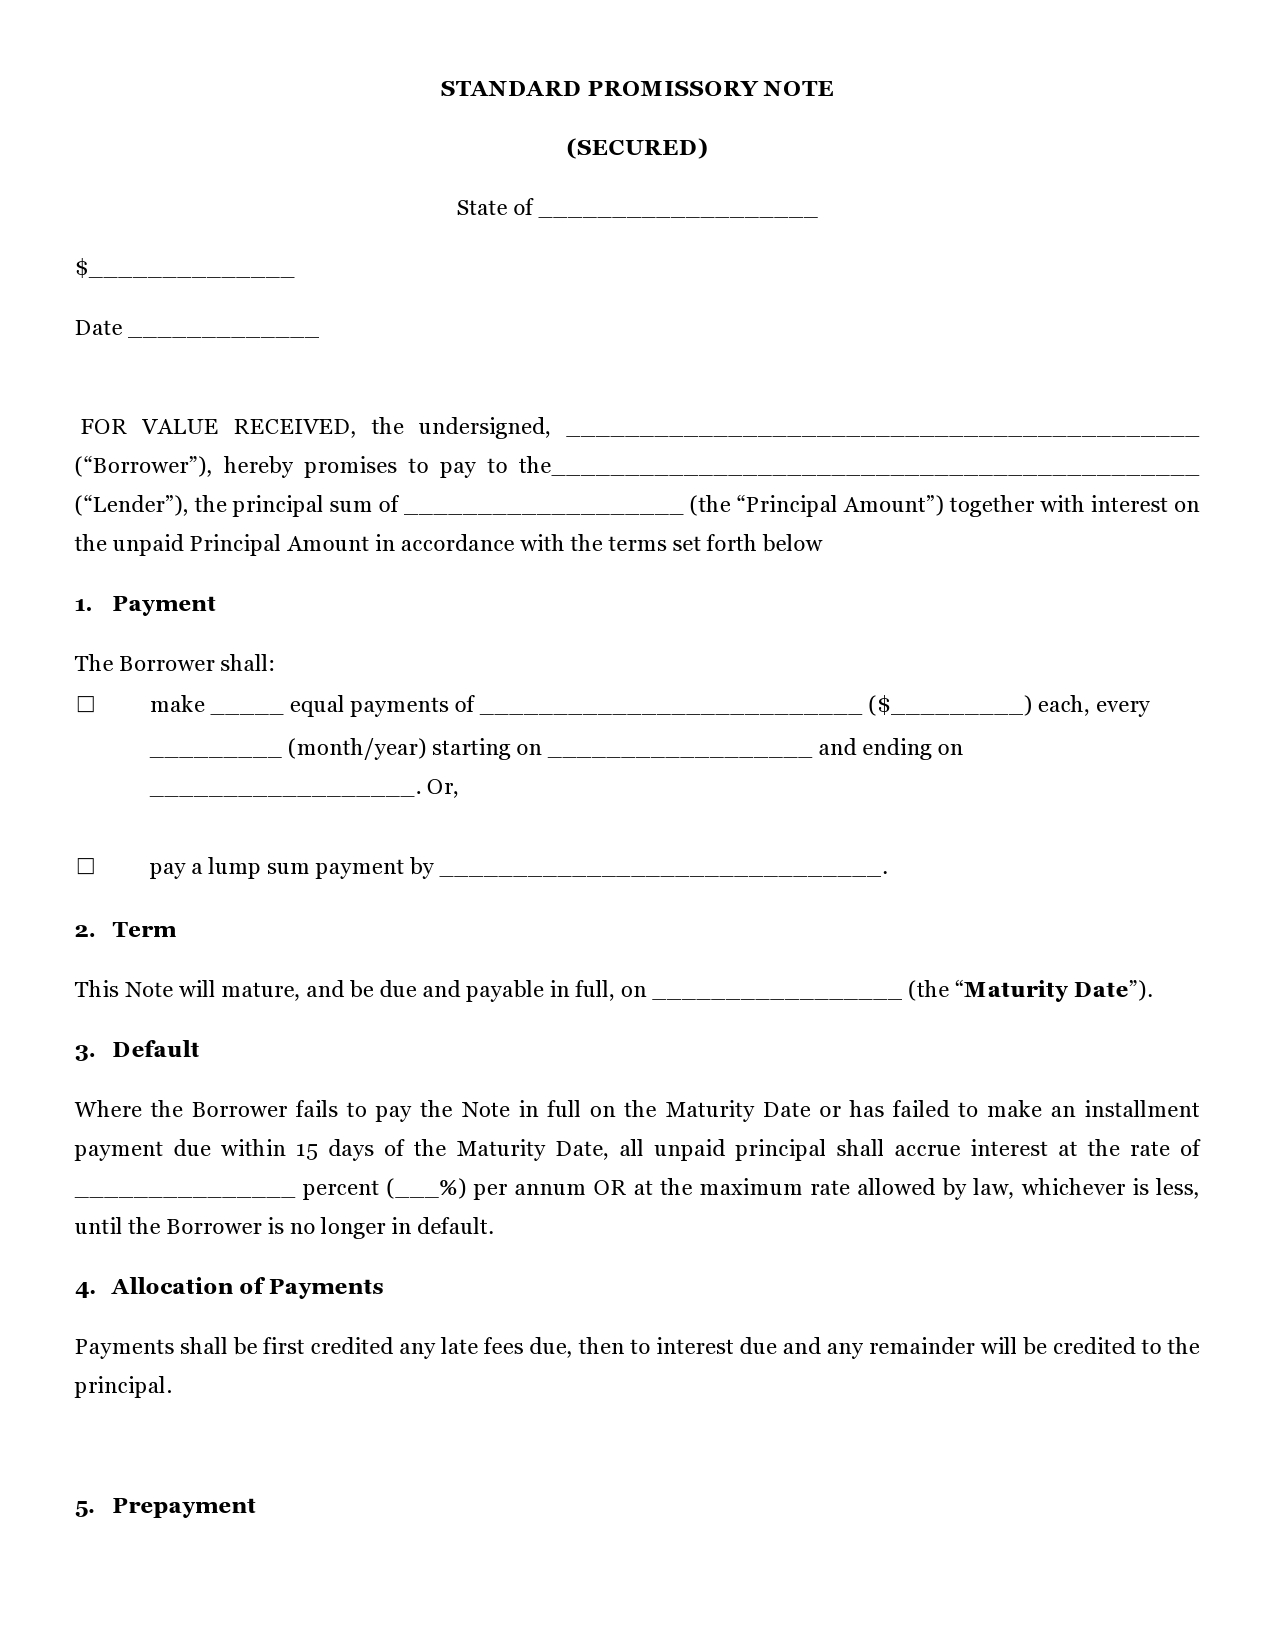 Free promissory note template 21